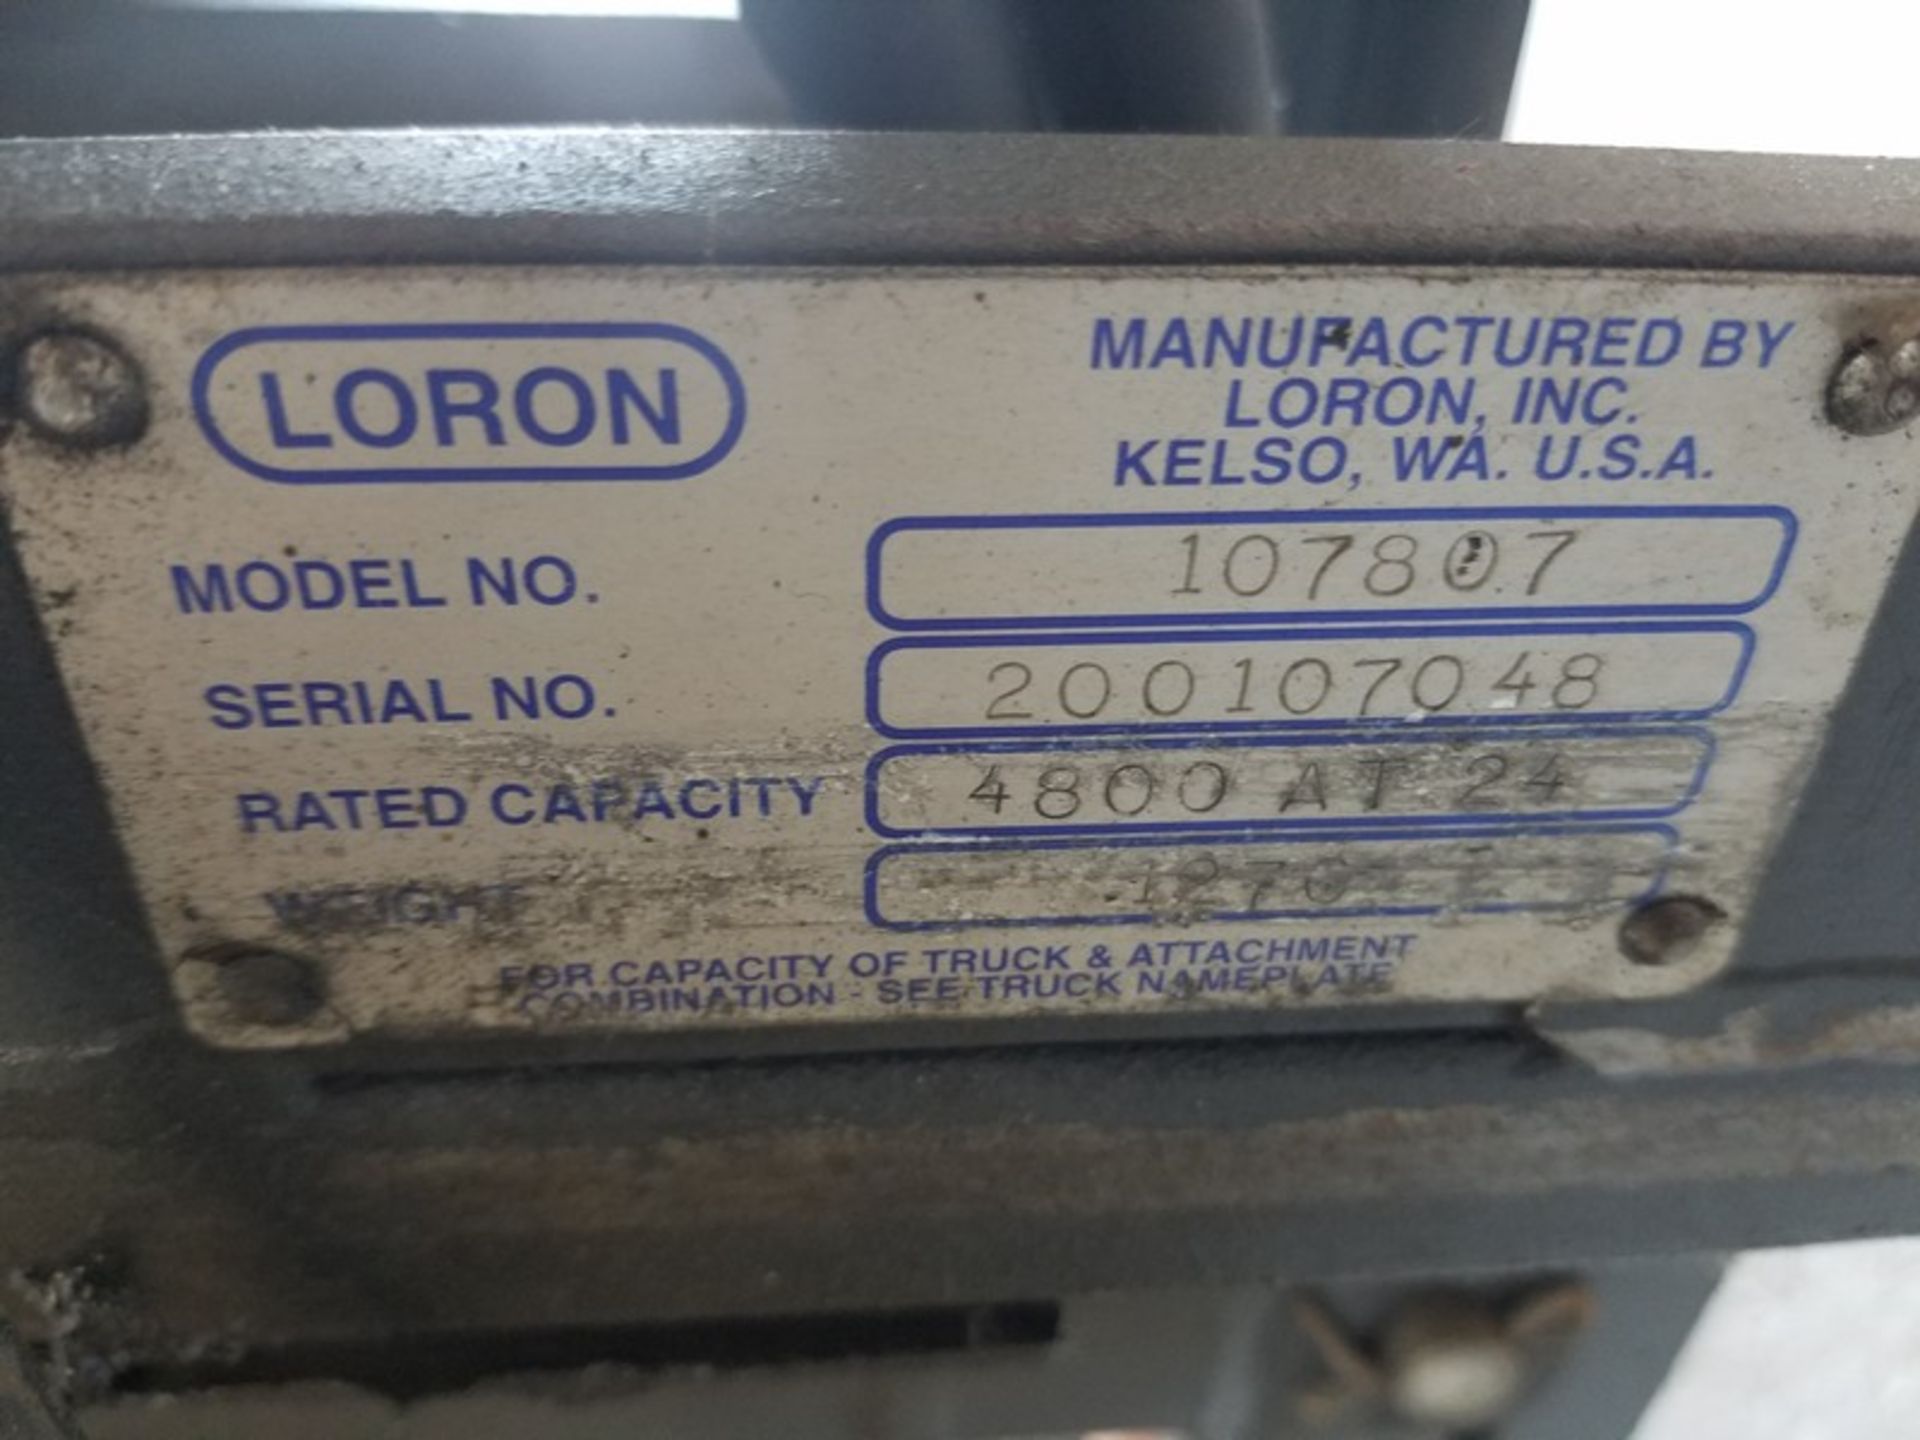 Loran 107807 forklift slip sheet attachment, serial # 206107040, rated capacity 4800 lbs. At 24 - Image 5 of 5